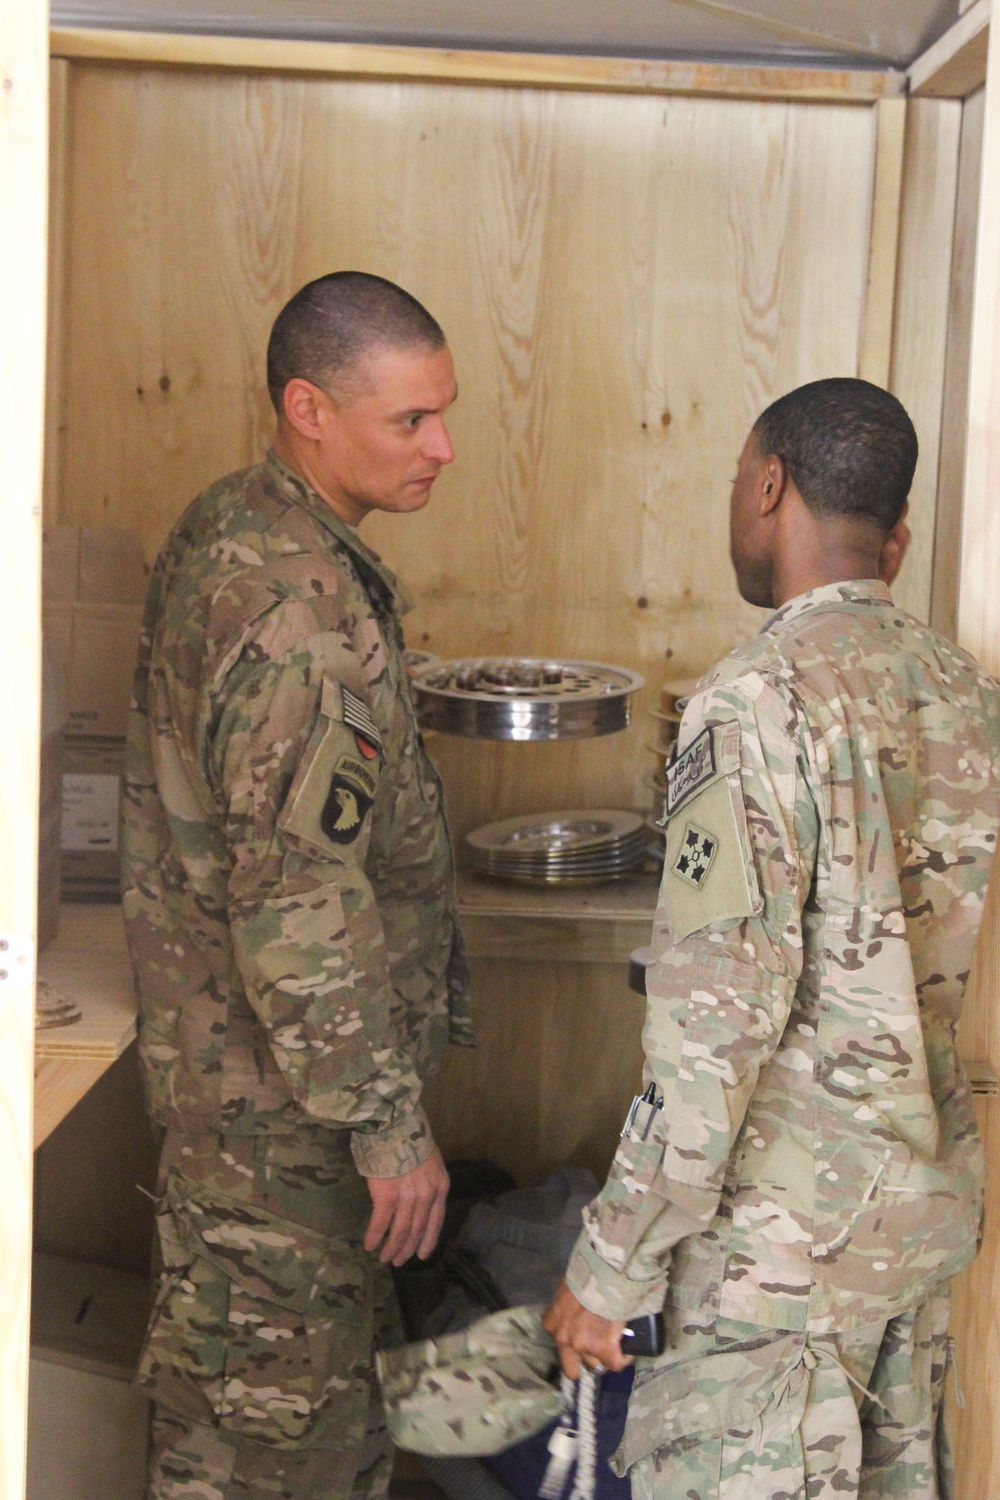 Master chaplain assistant serves in Afghanistan with pride